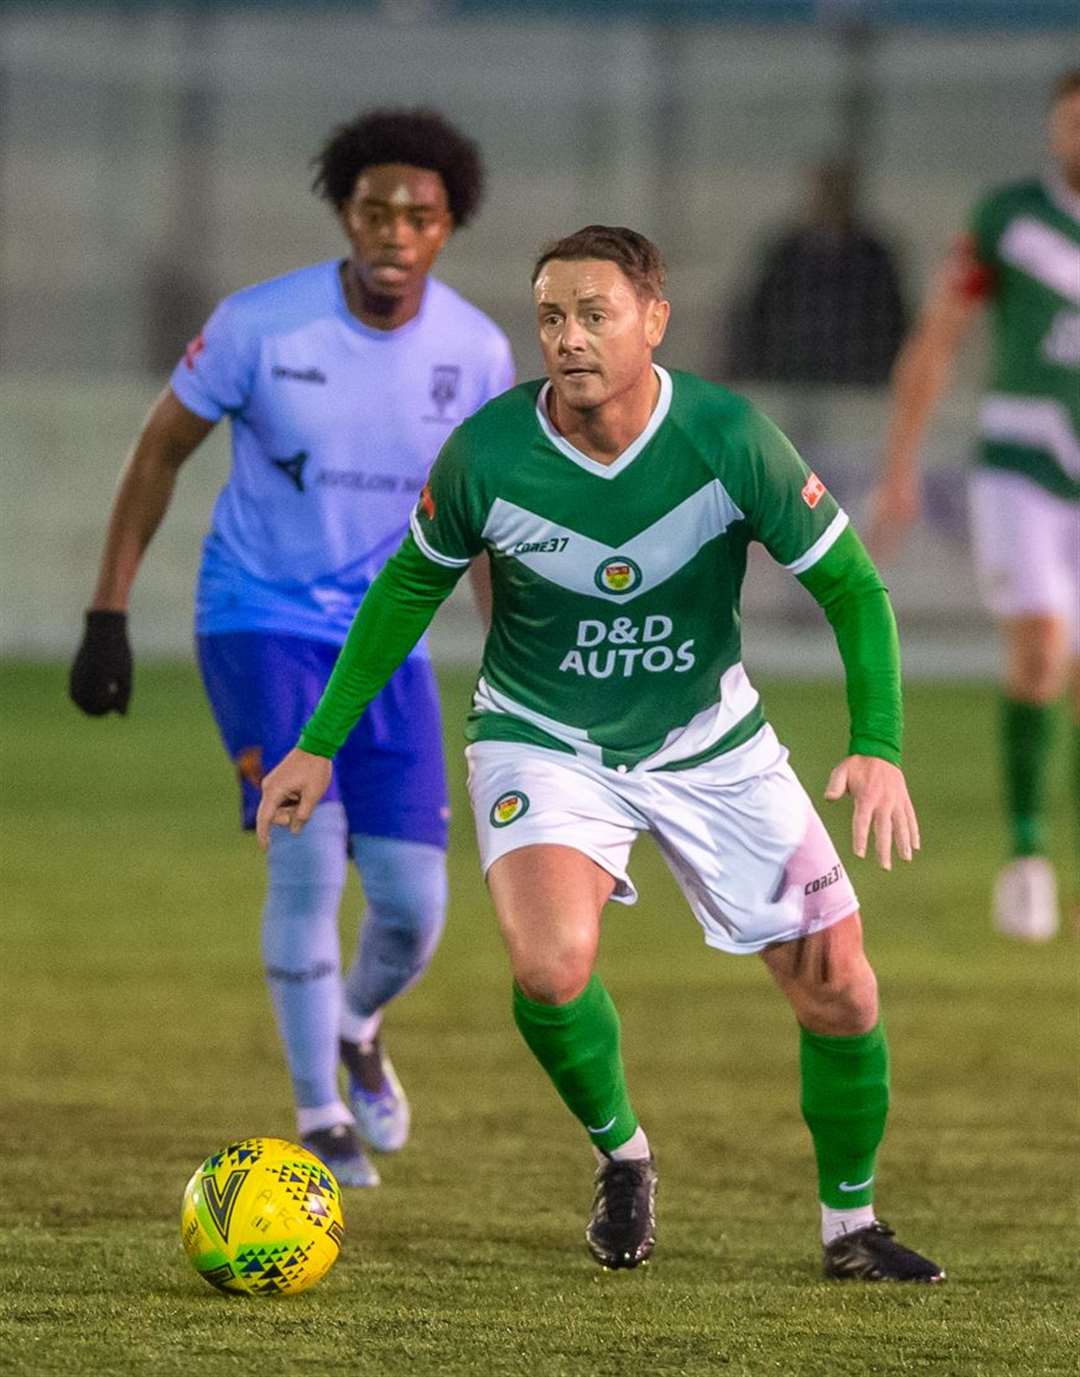 Frannie Collin made his Ashford debut in the Nuts & Bolts' 2-2 draw with Lancing Picture: Ian Scammell